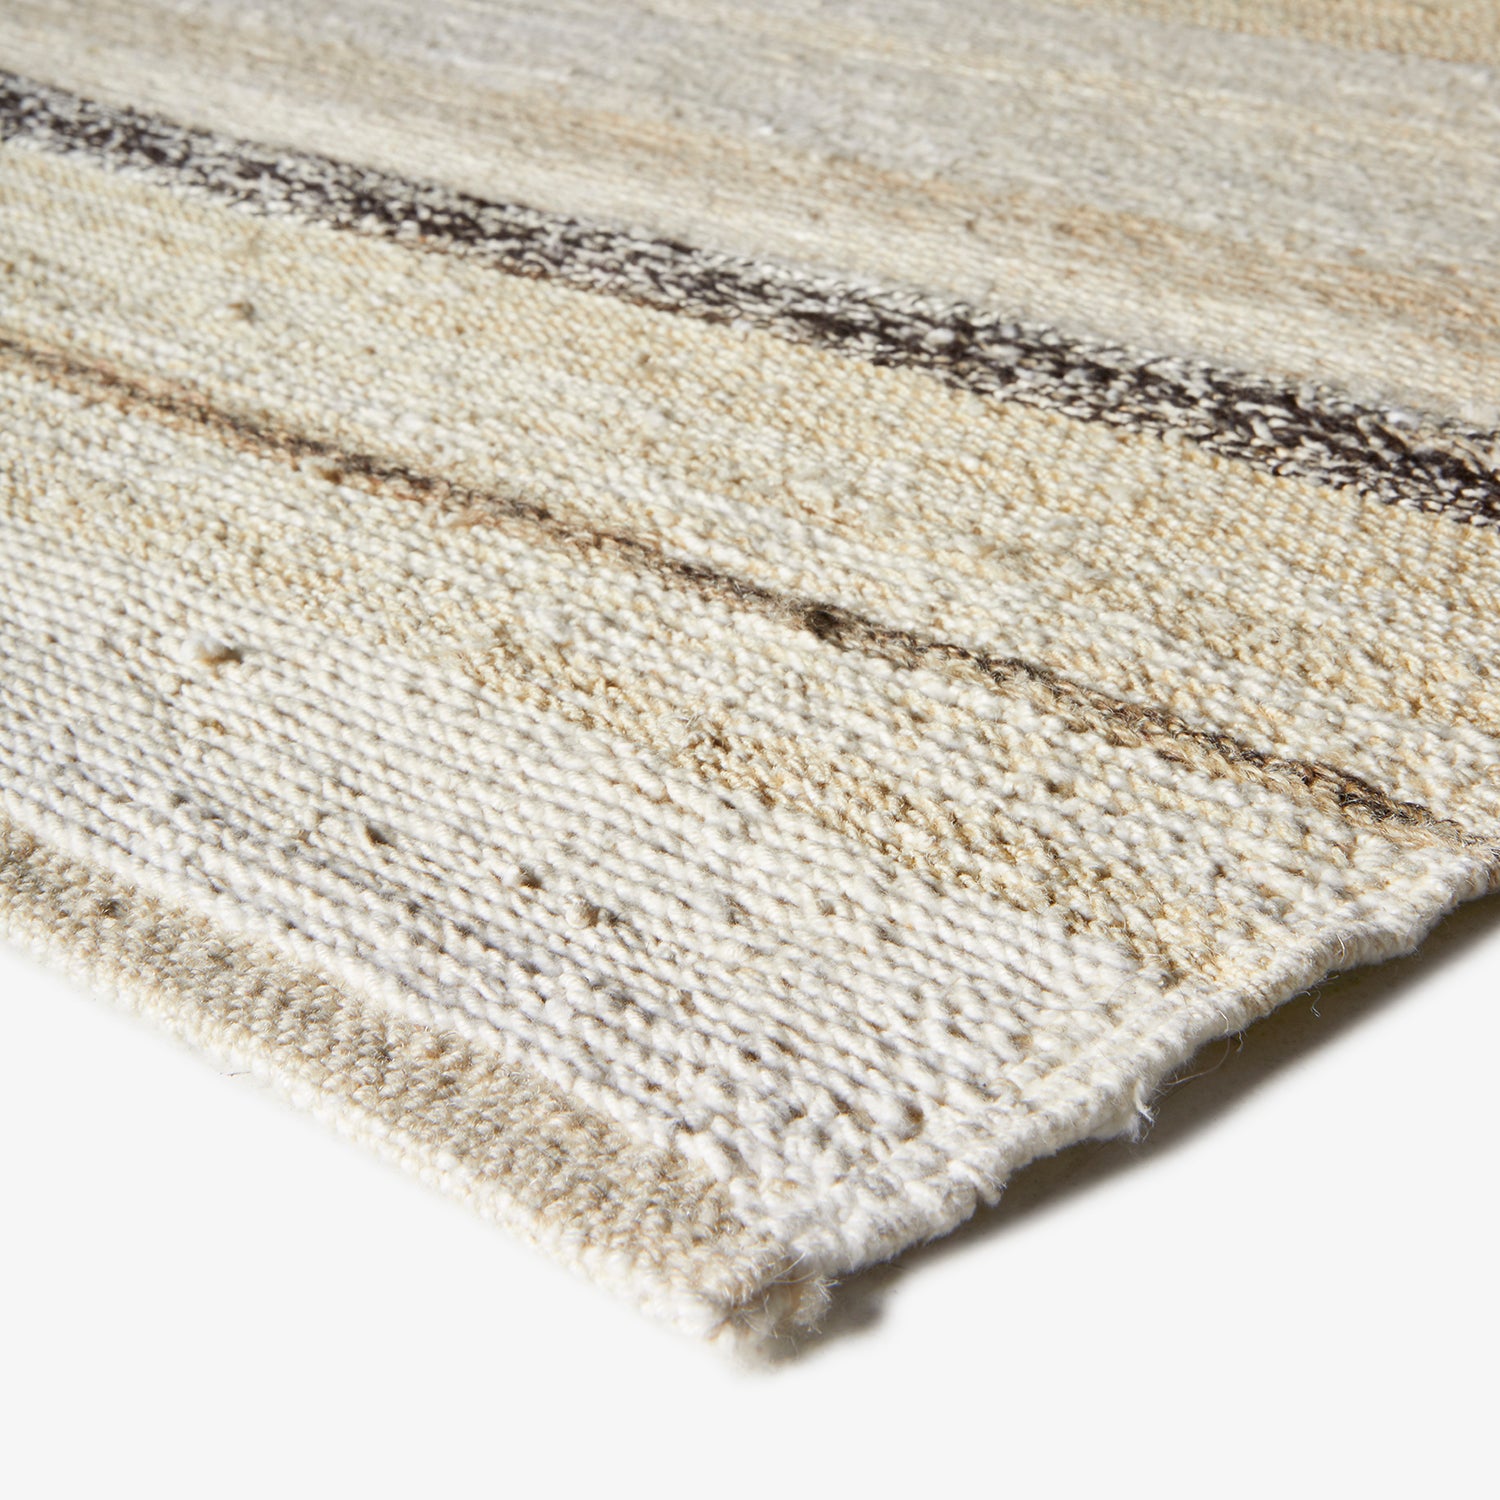 Cream and off-white textured fabric with dark linear elements.